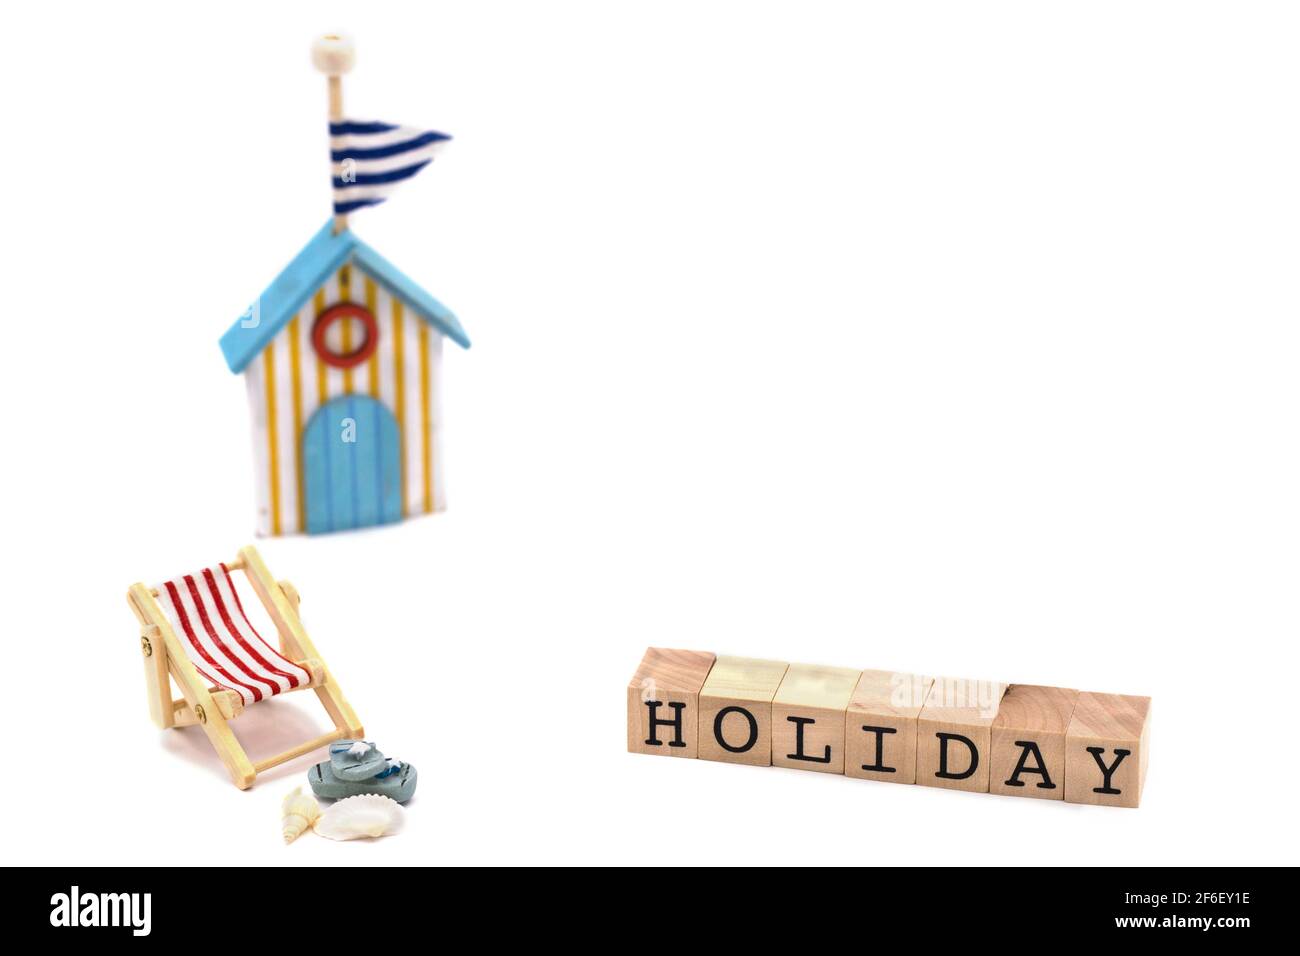 Beach chair with sandals, shells, bath house, wooden blocks with text vacation Stock Photo